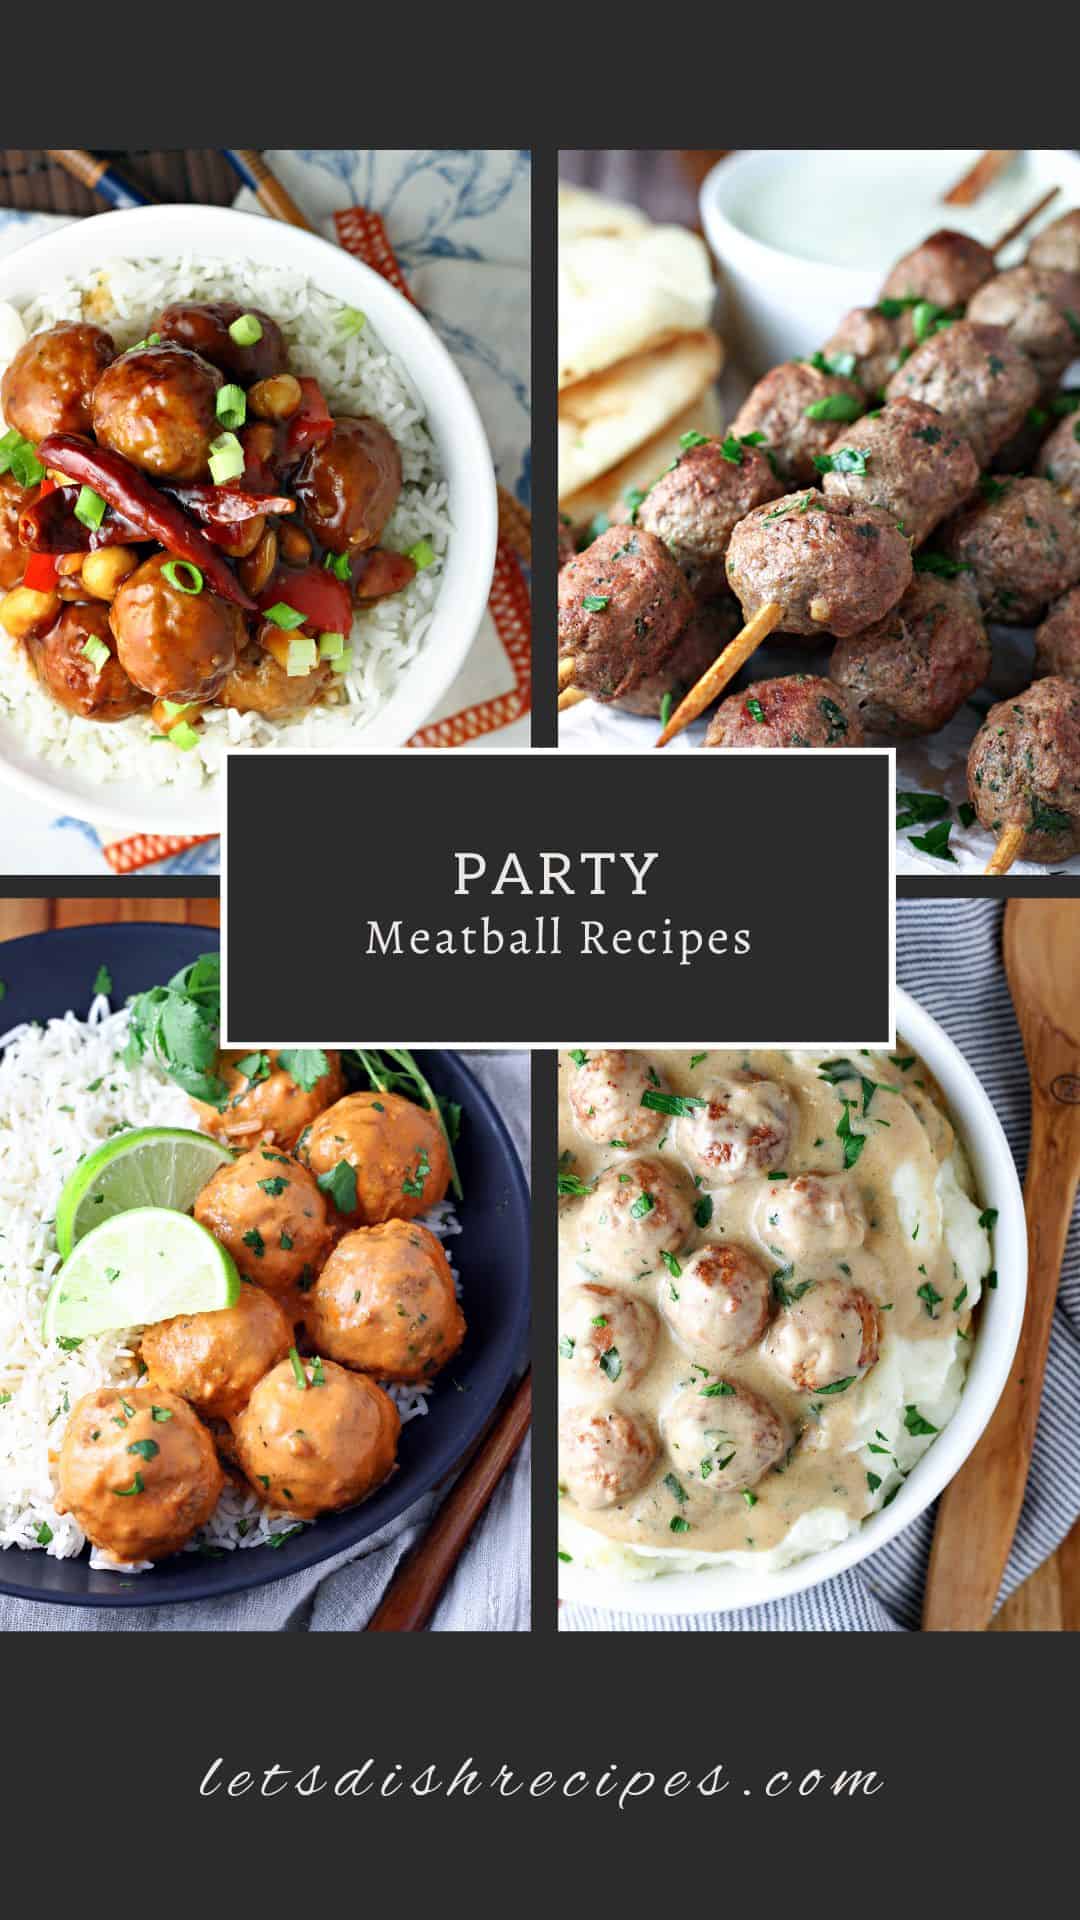 Best Party Meatball Recipes